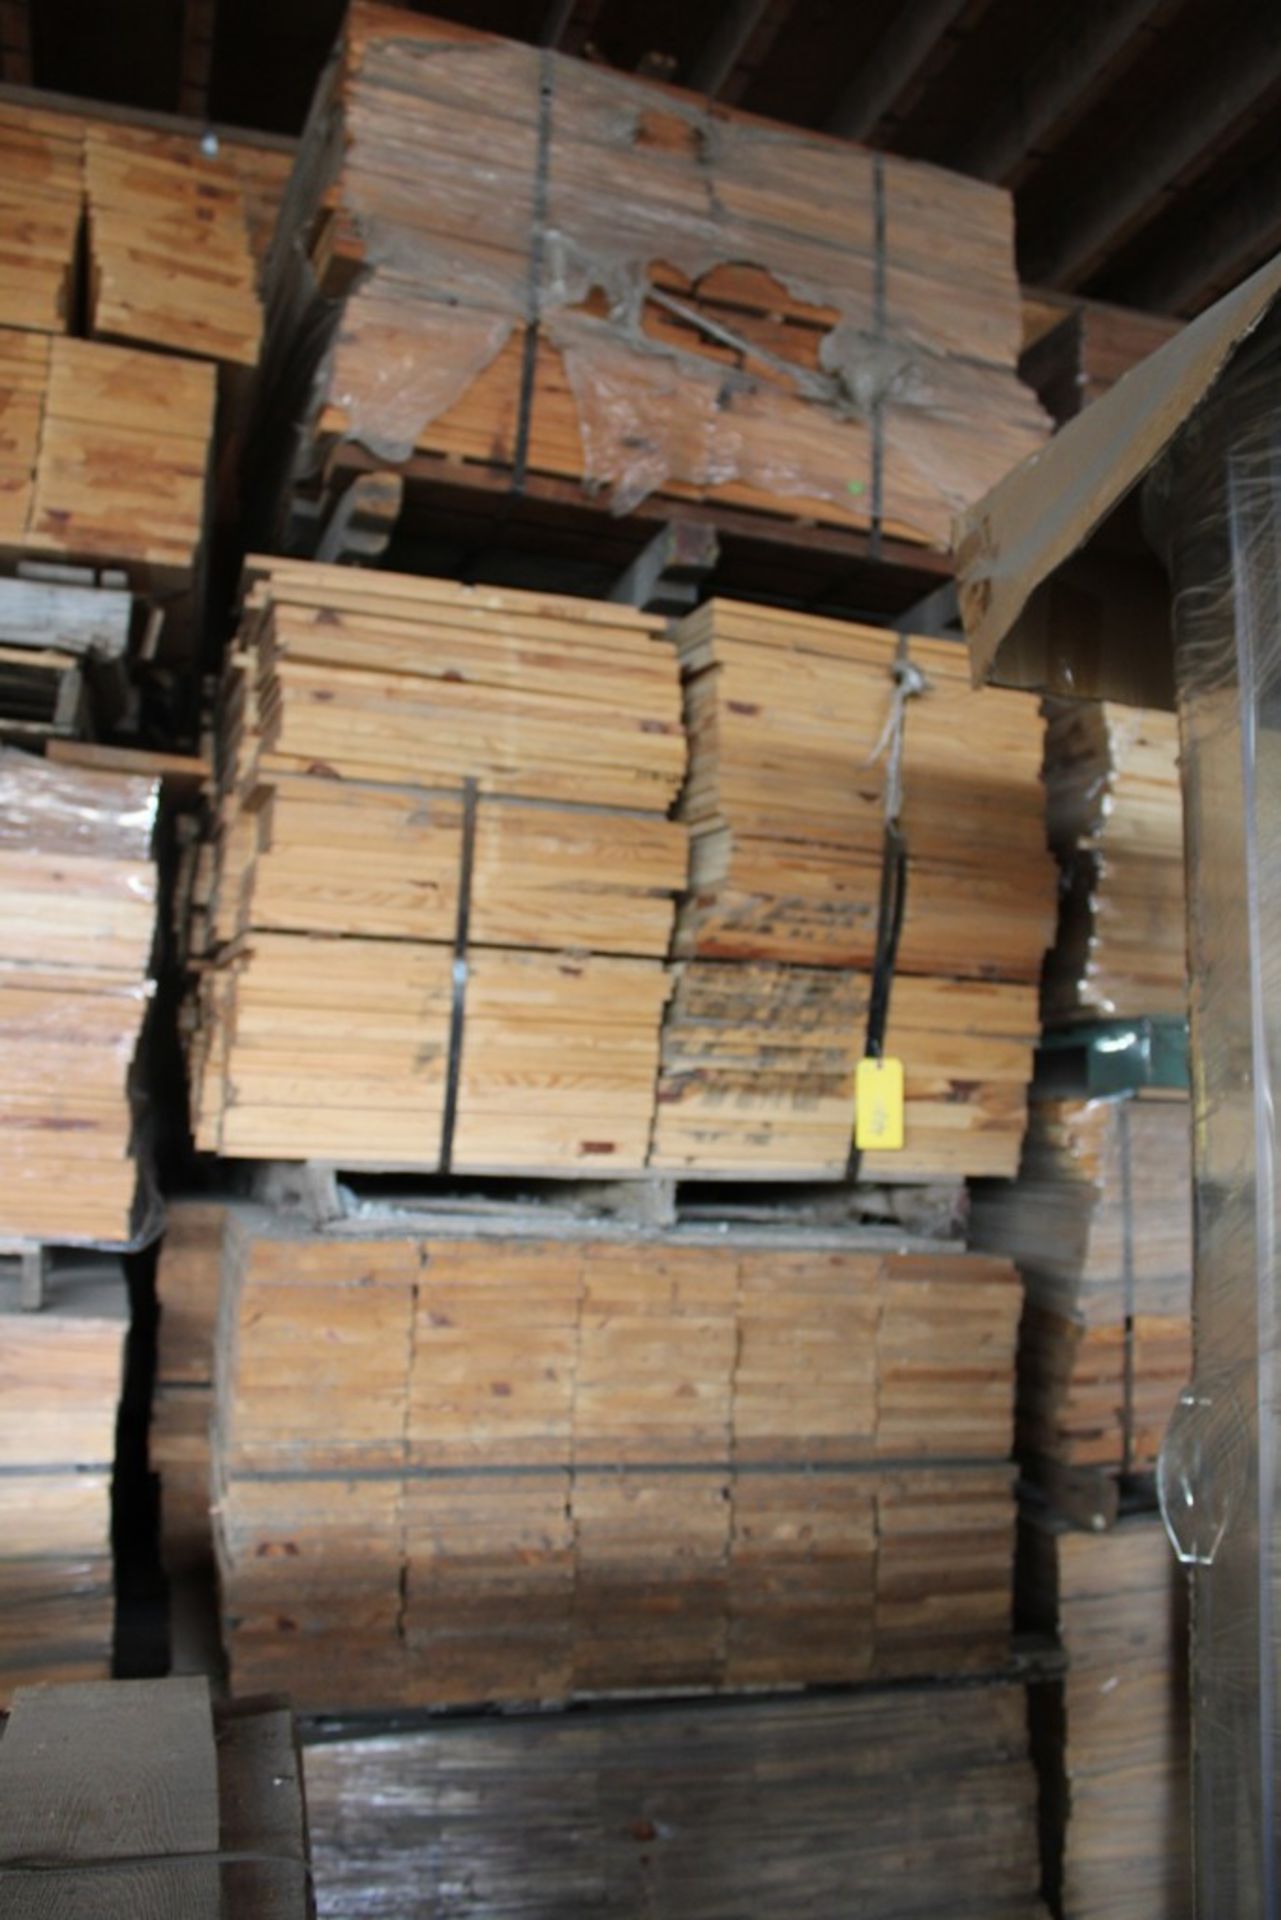 LARGE QUANTITY OF 9" X 24" PINE BOARDS IN STACK